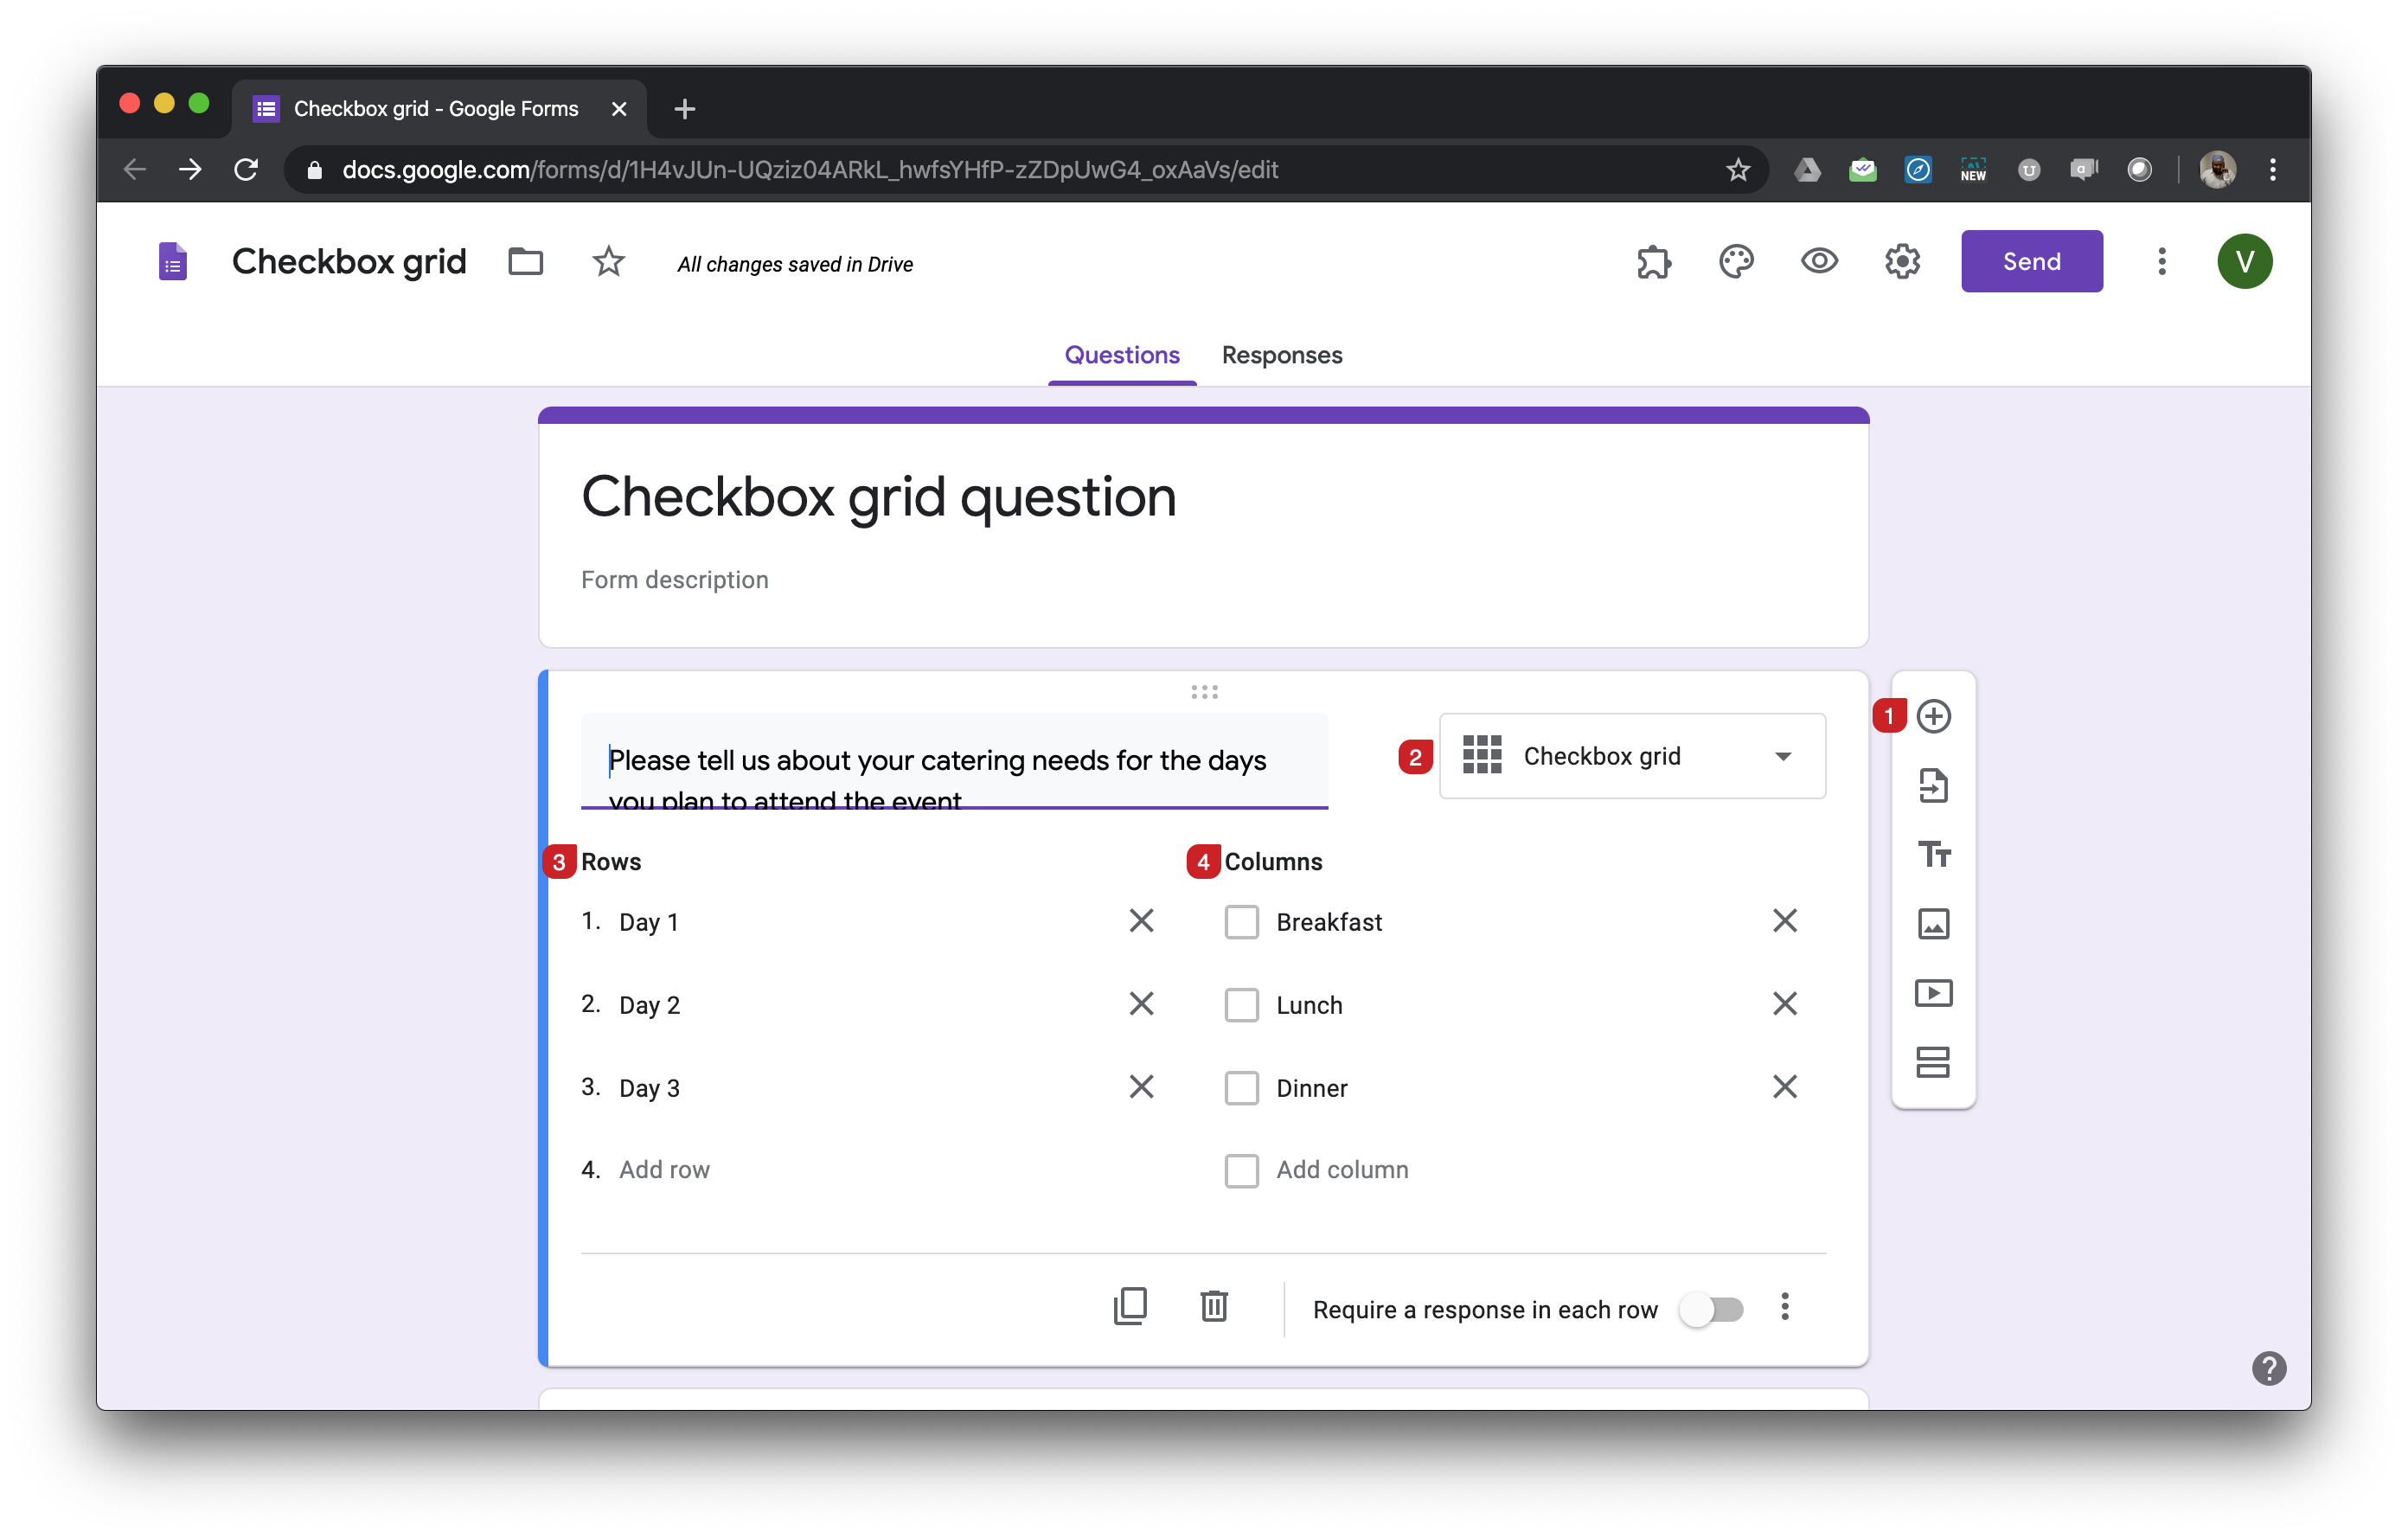 Checkbox grid question allows users to select multiple answers for each row in a grid. You can limit users to select only one answer per column and make users answer each question (row). You can also shuffle the row order to eliminate the order bias and improve the form responses.